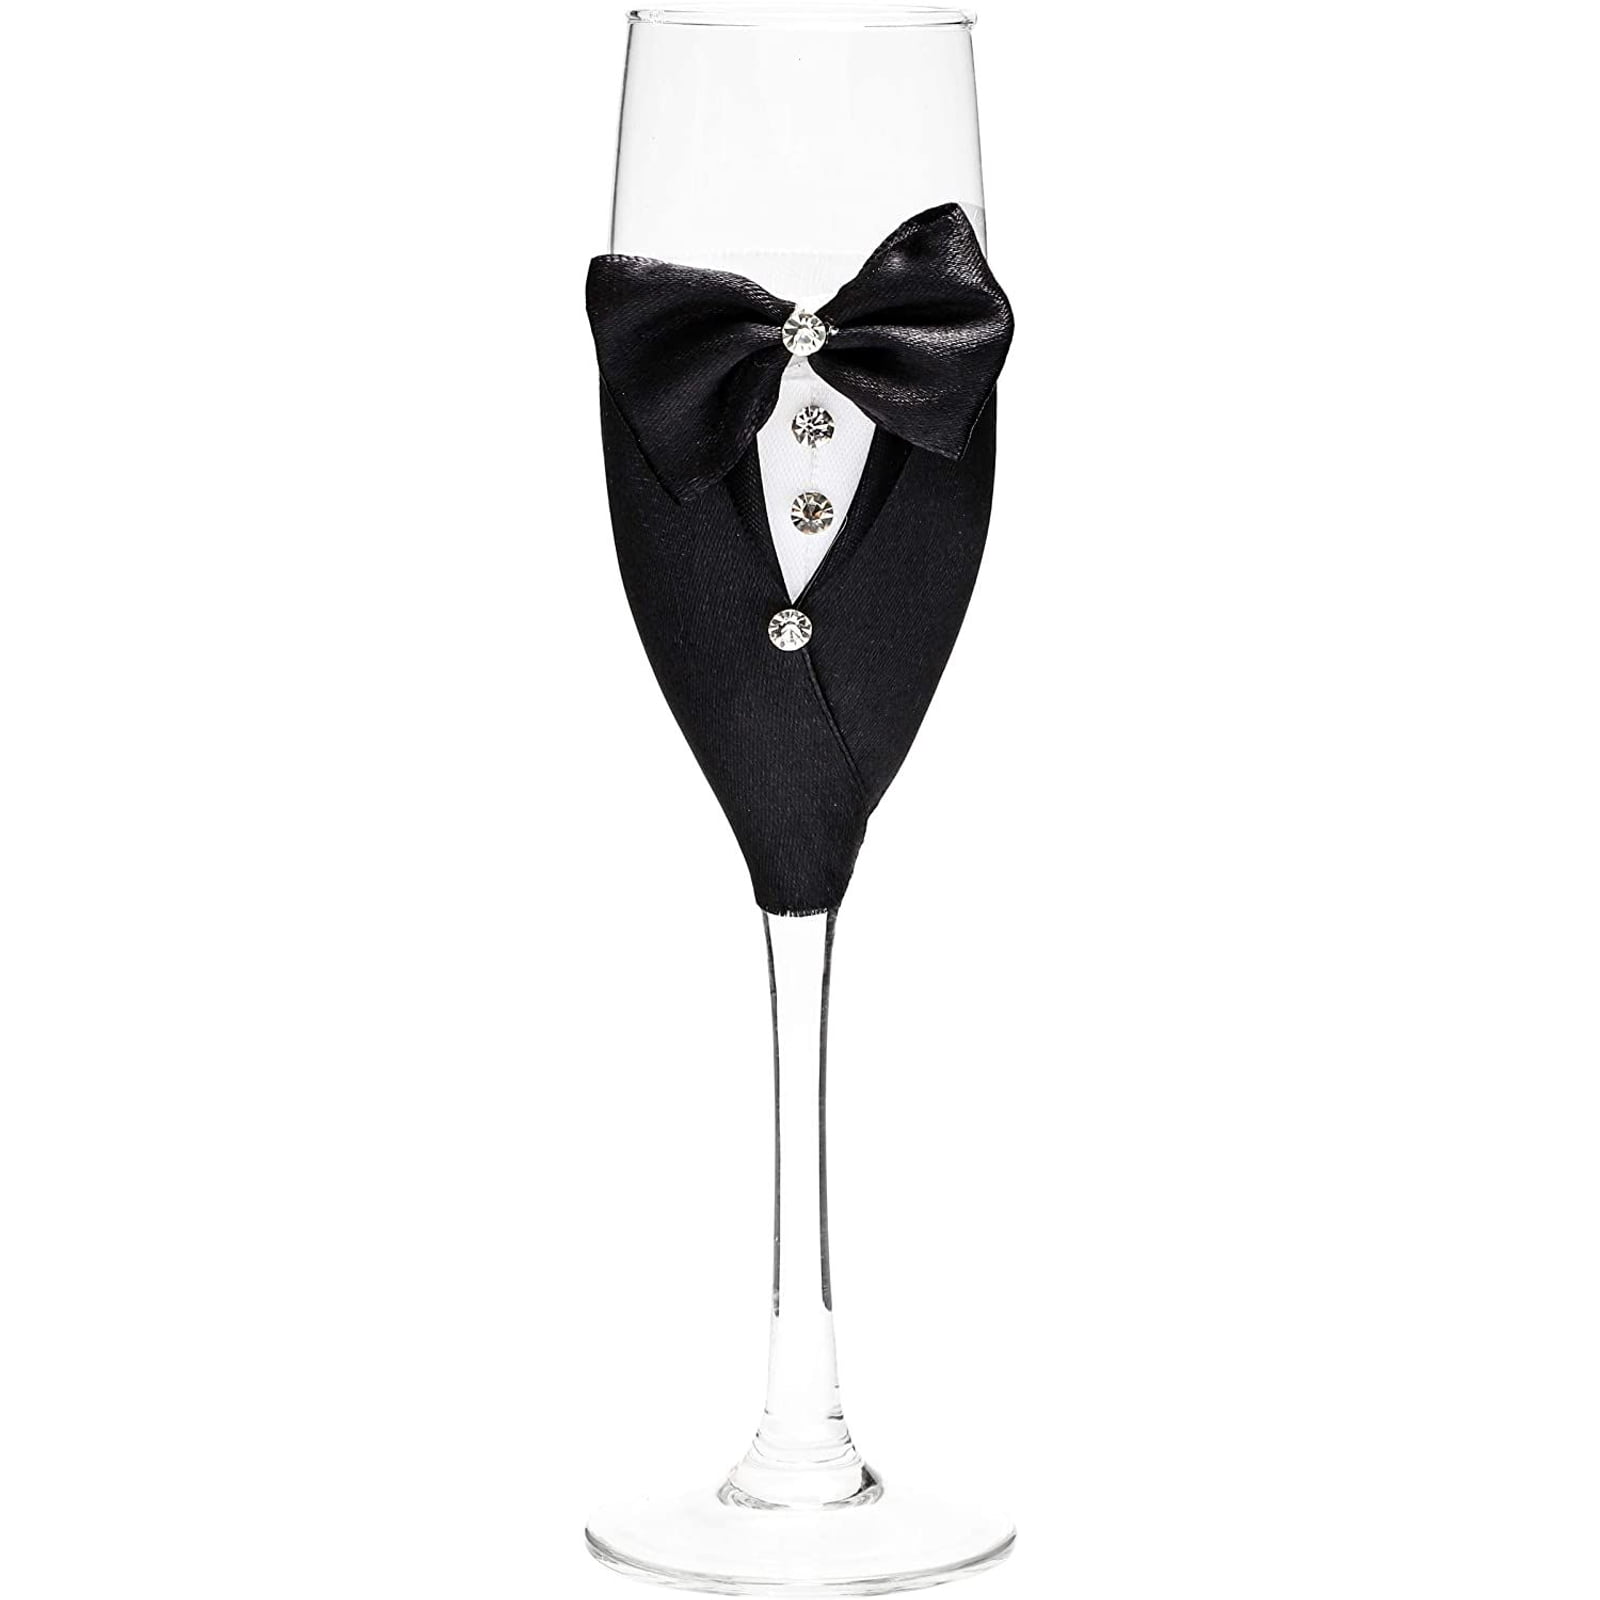 Mr & Mrs Champagne flutes with red heart on the Mrs Glass Wedding Engagement 